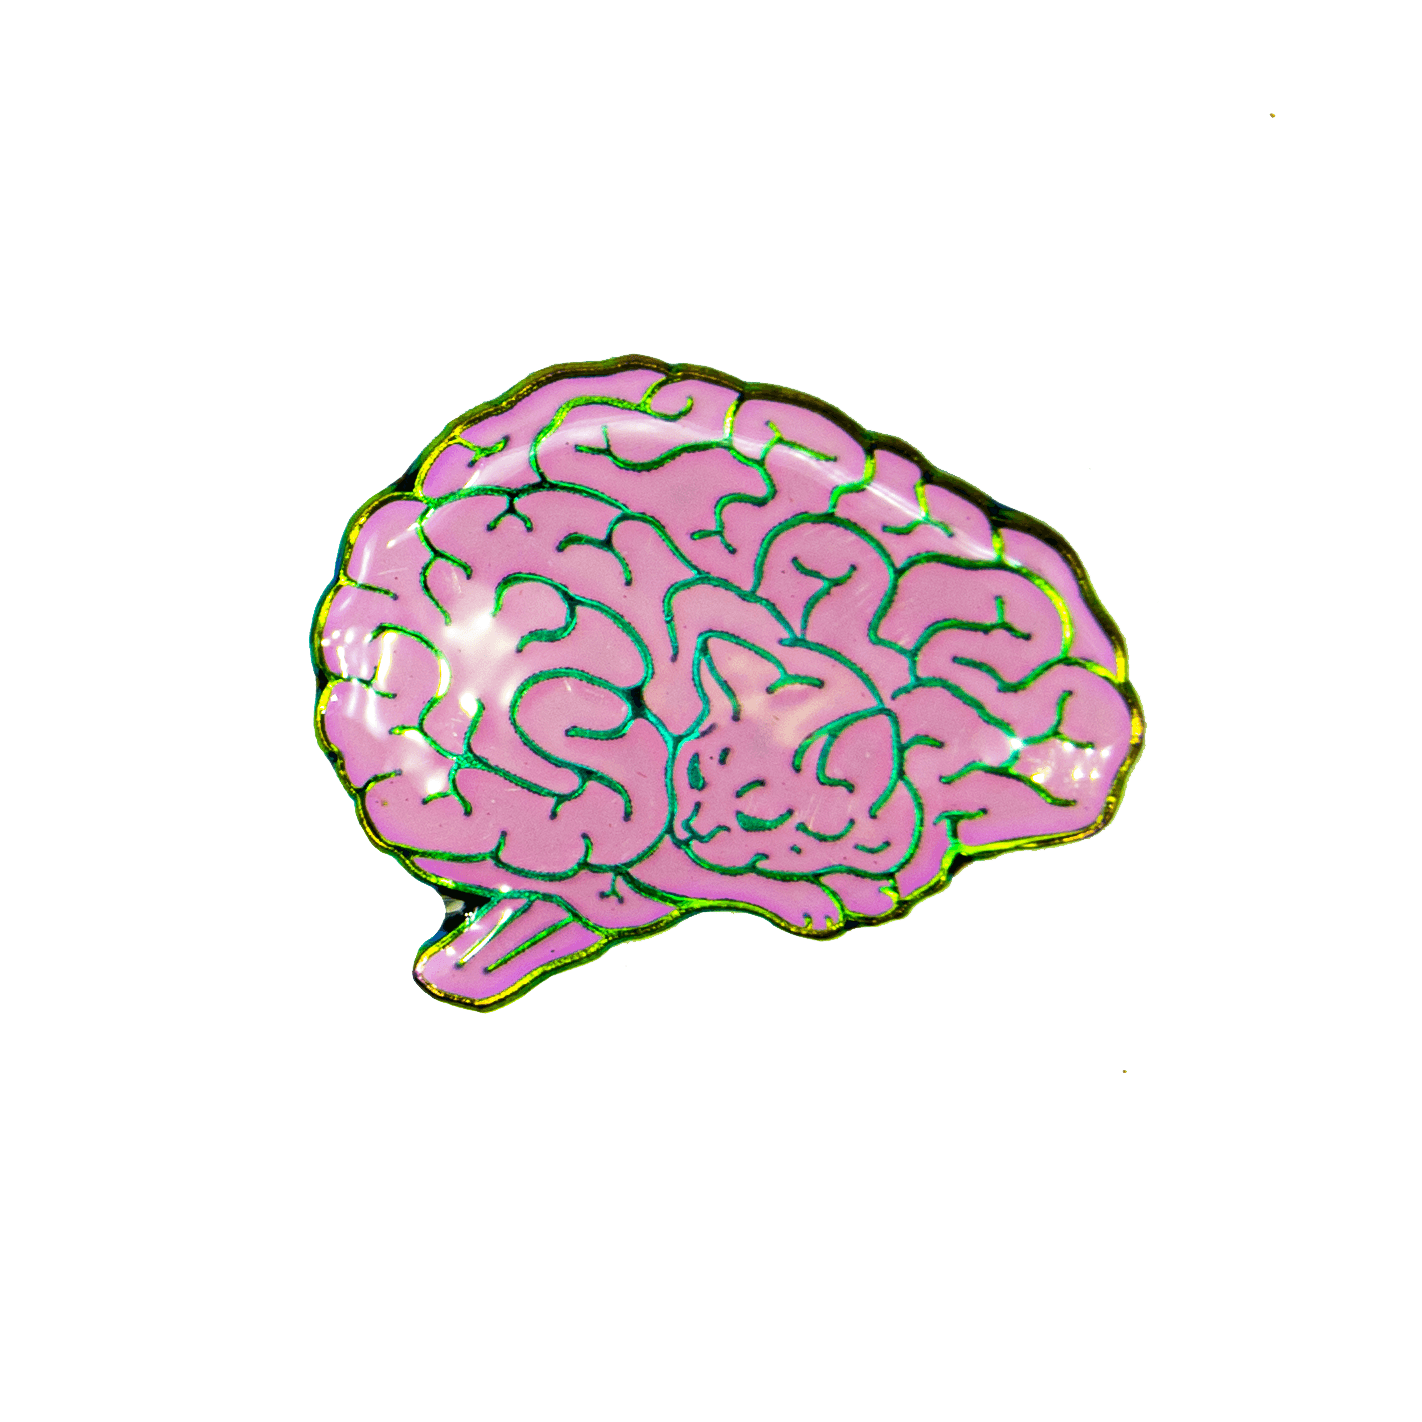 A rainbow metal and epoxy pin in the shape of a human brain. Upon closer inspection, the lines of the brain resemble a sleeping cat.